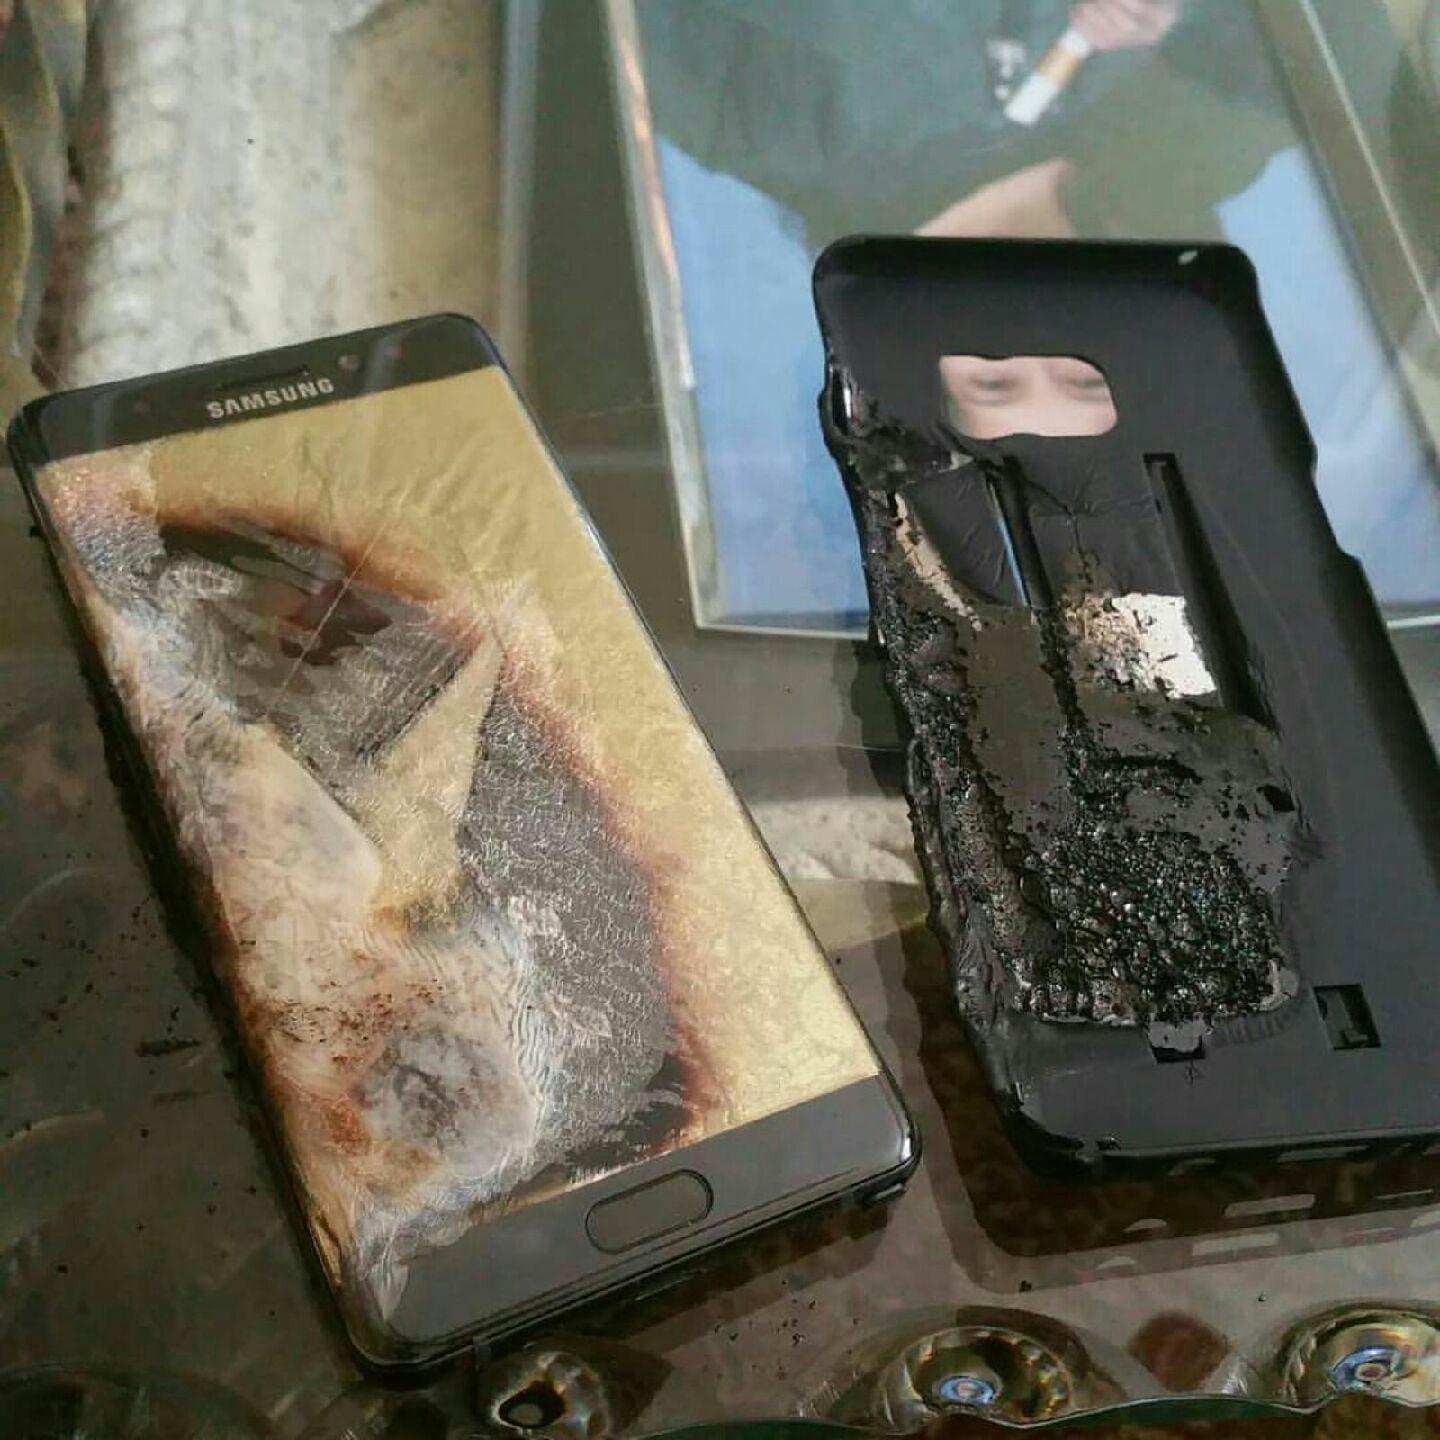 A Samsung Galaxy Note 7 after catching on fire - Samsung to give Galaxy Note 7 owners a Galaxy J model until the new phablets are launched